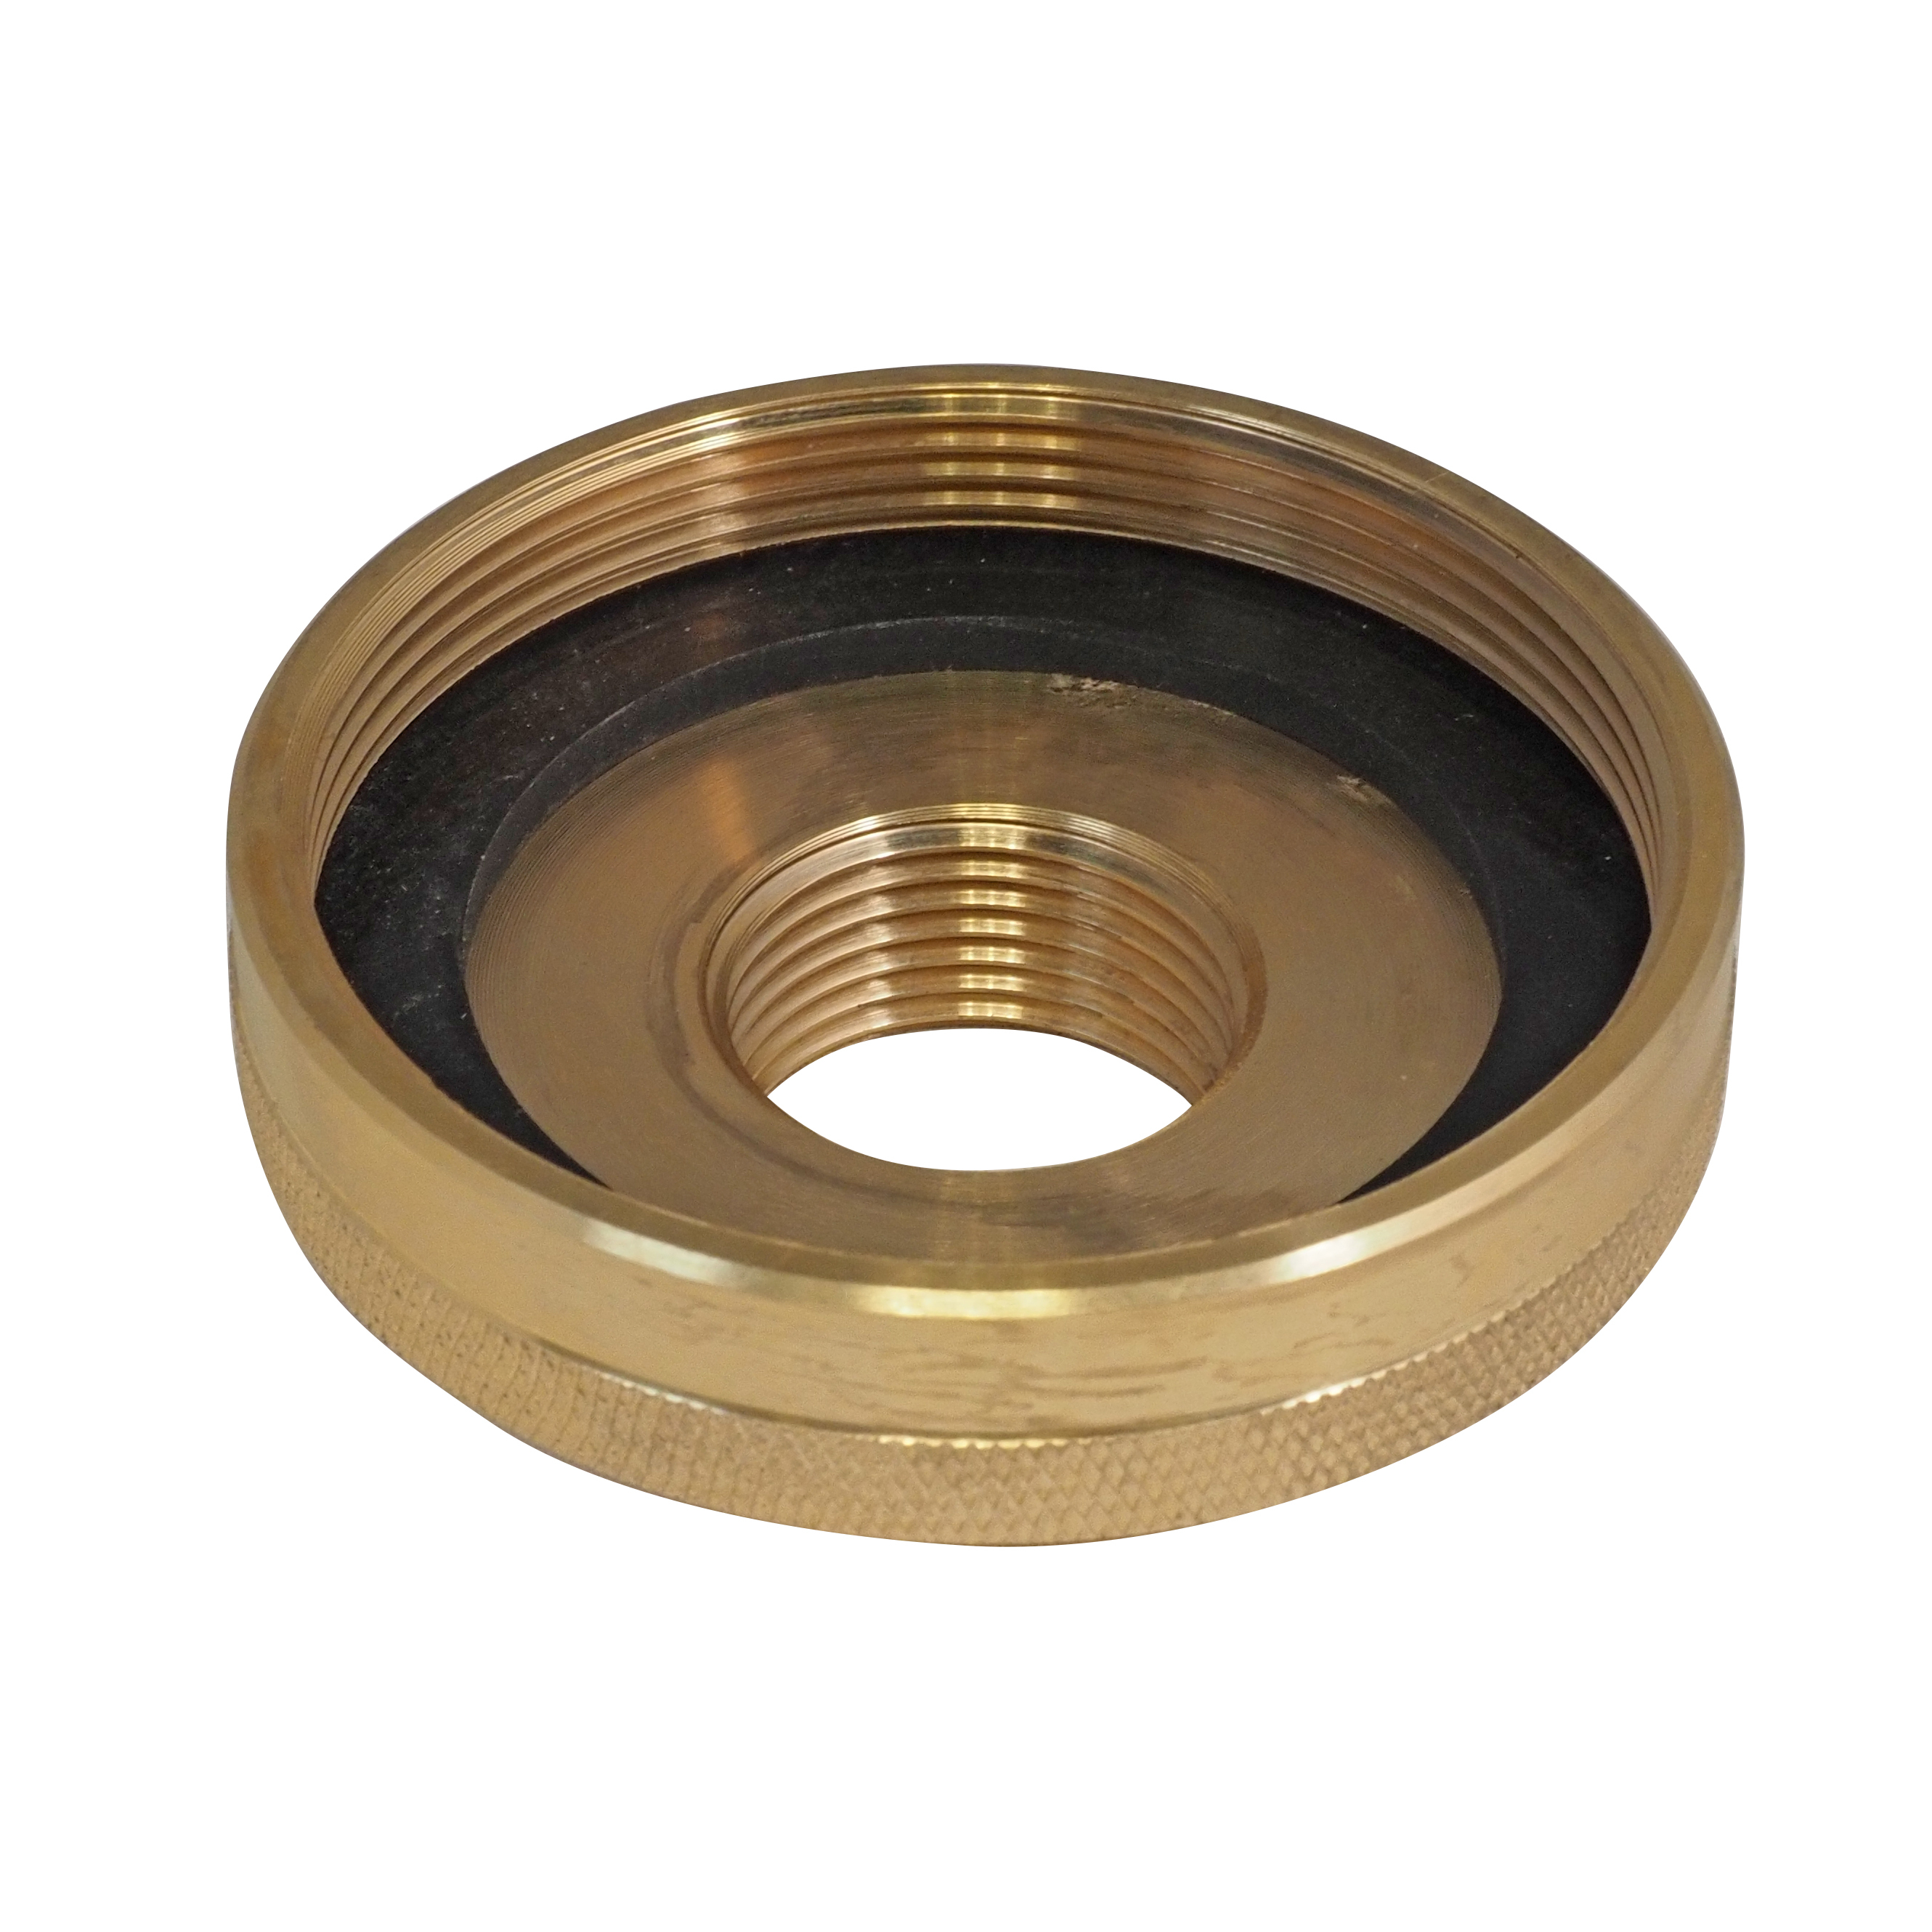 Adapter 1 inch IT to G 2 3/4 inch IT brass